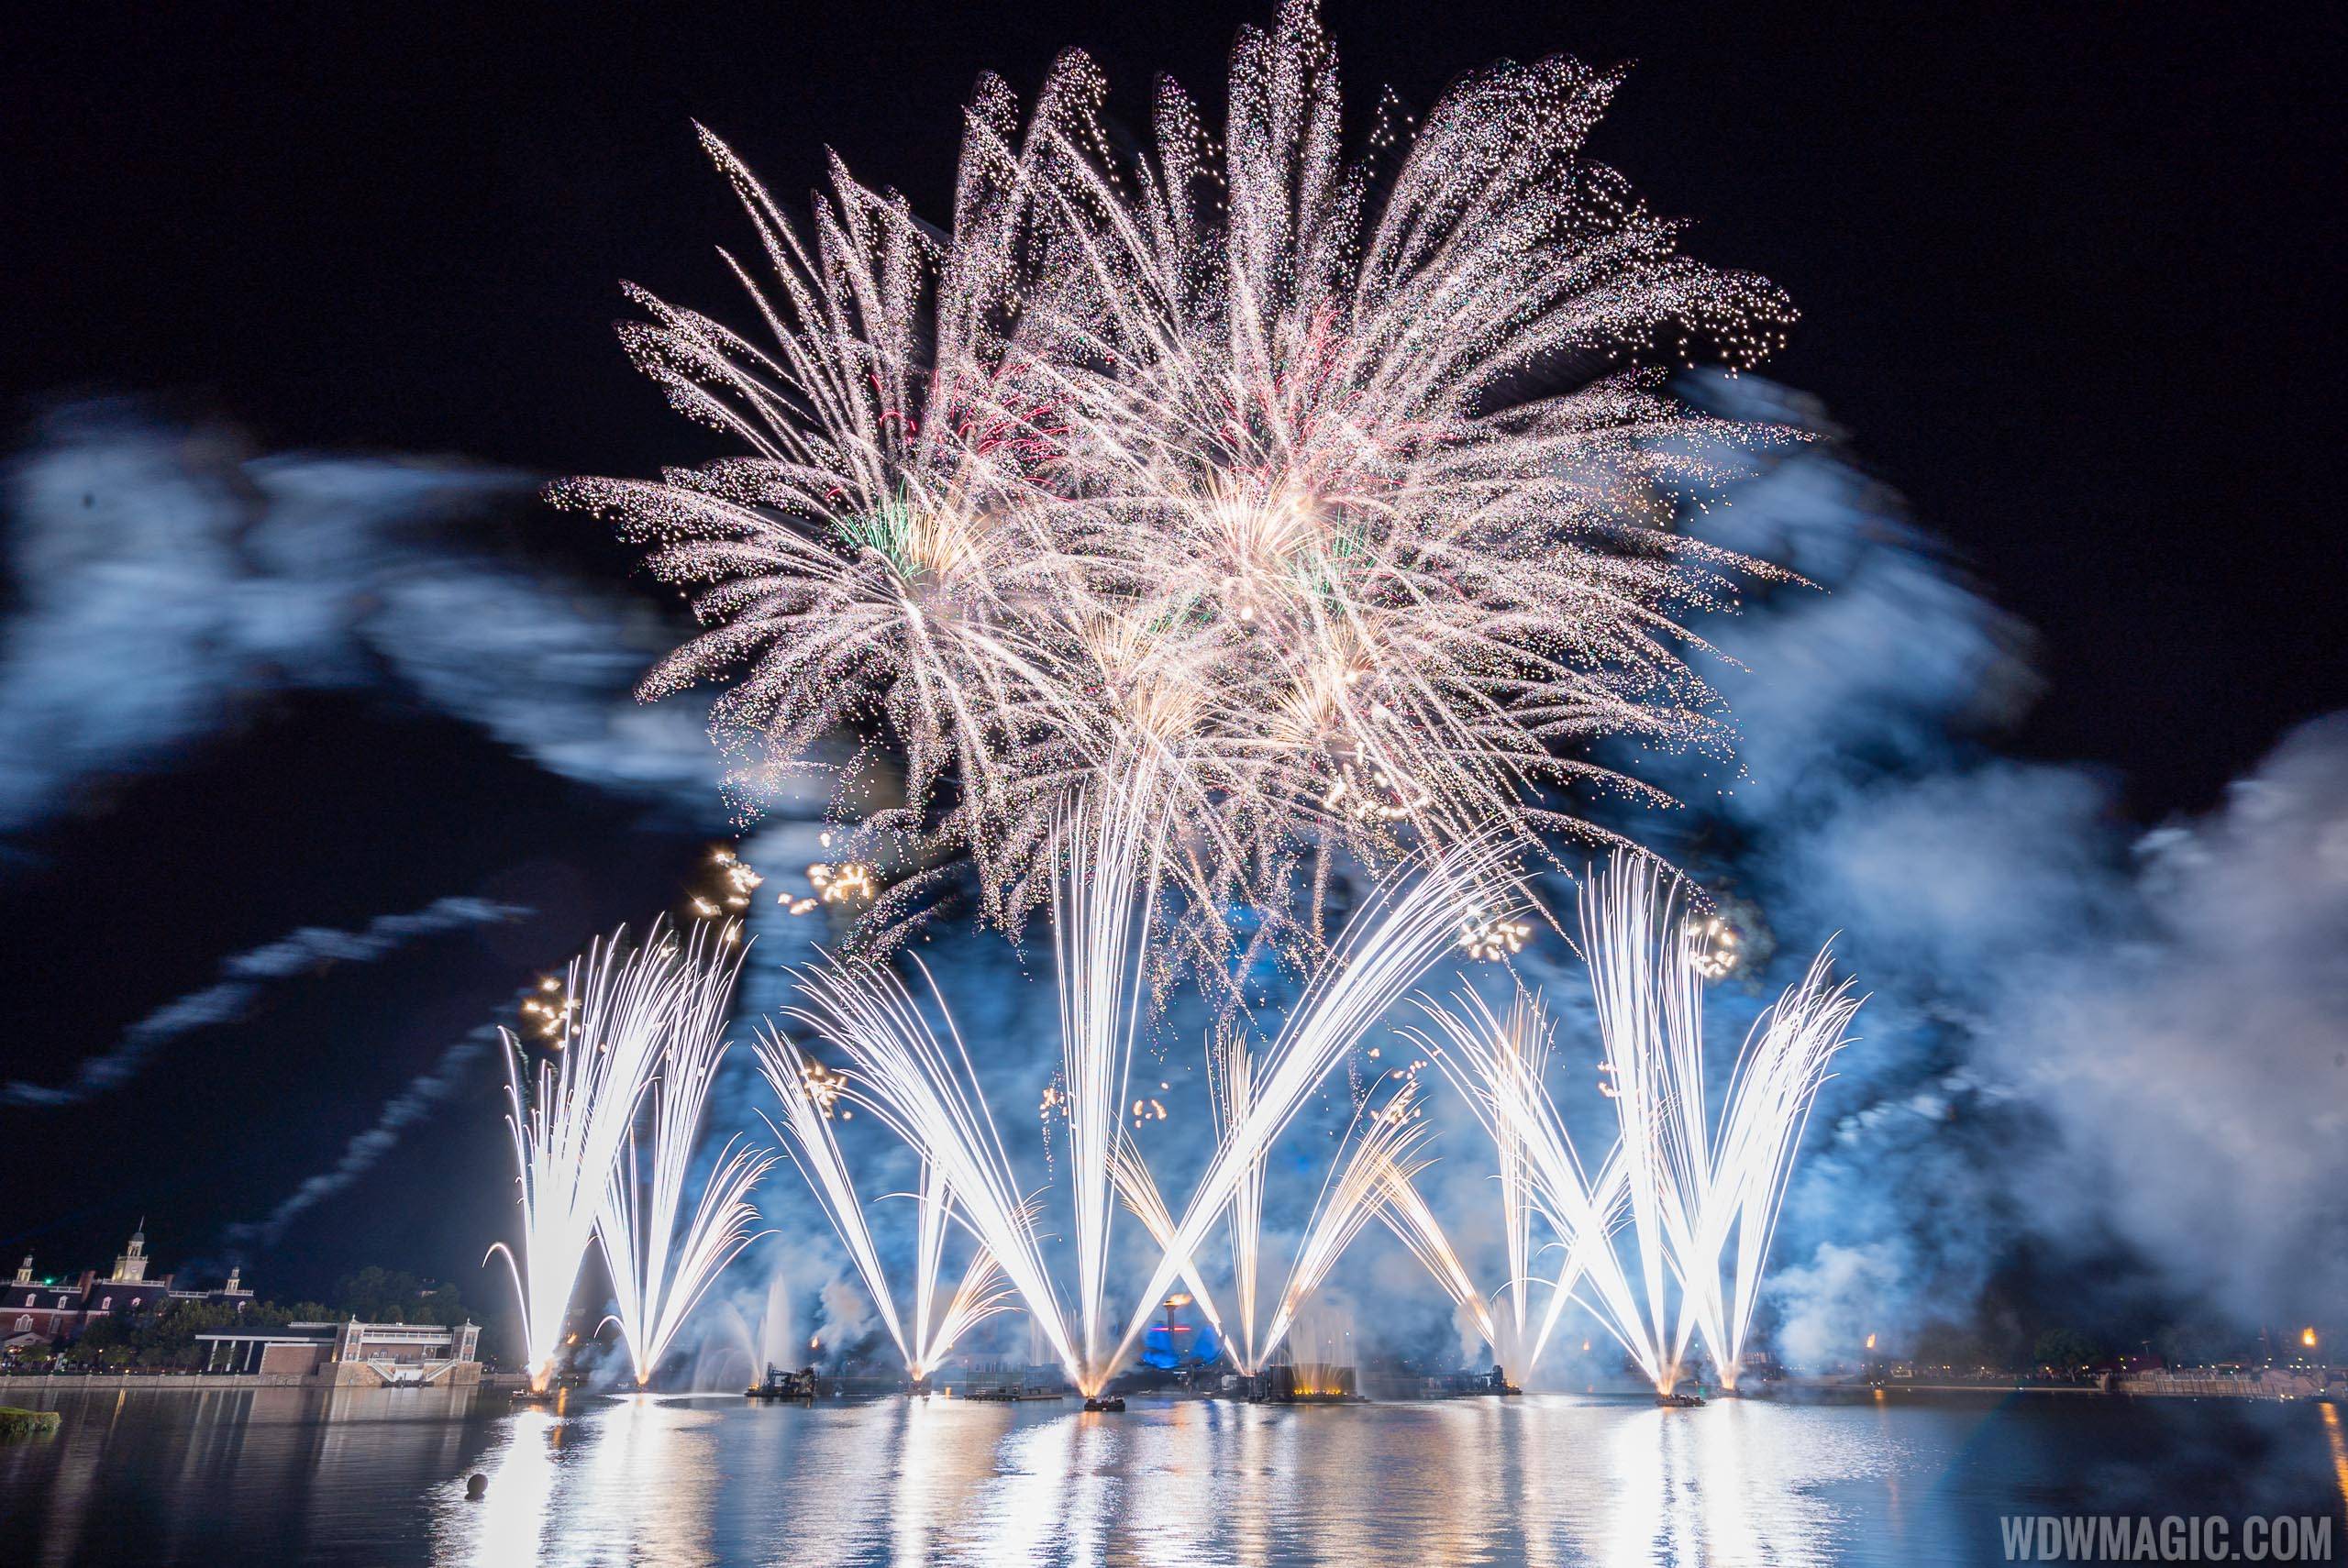 IllumiNations Reflections of Earth from Norway - September 2019